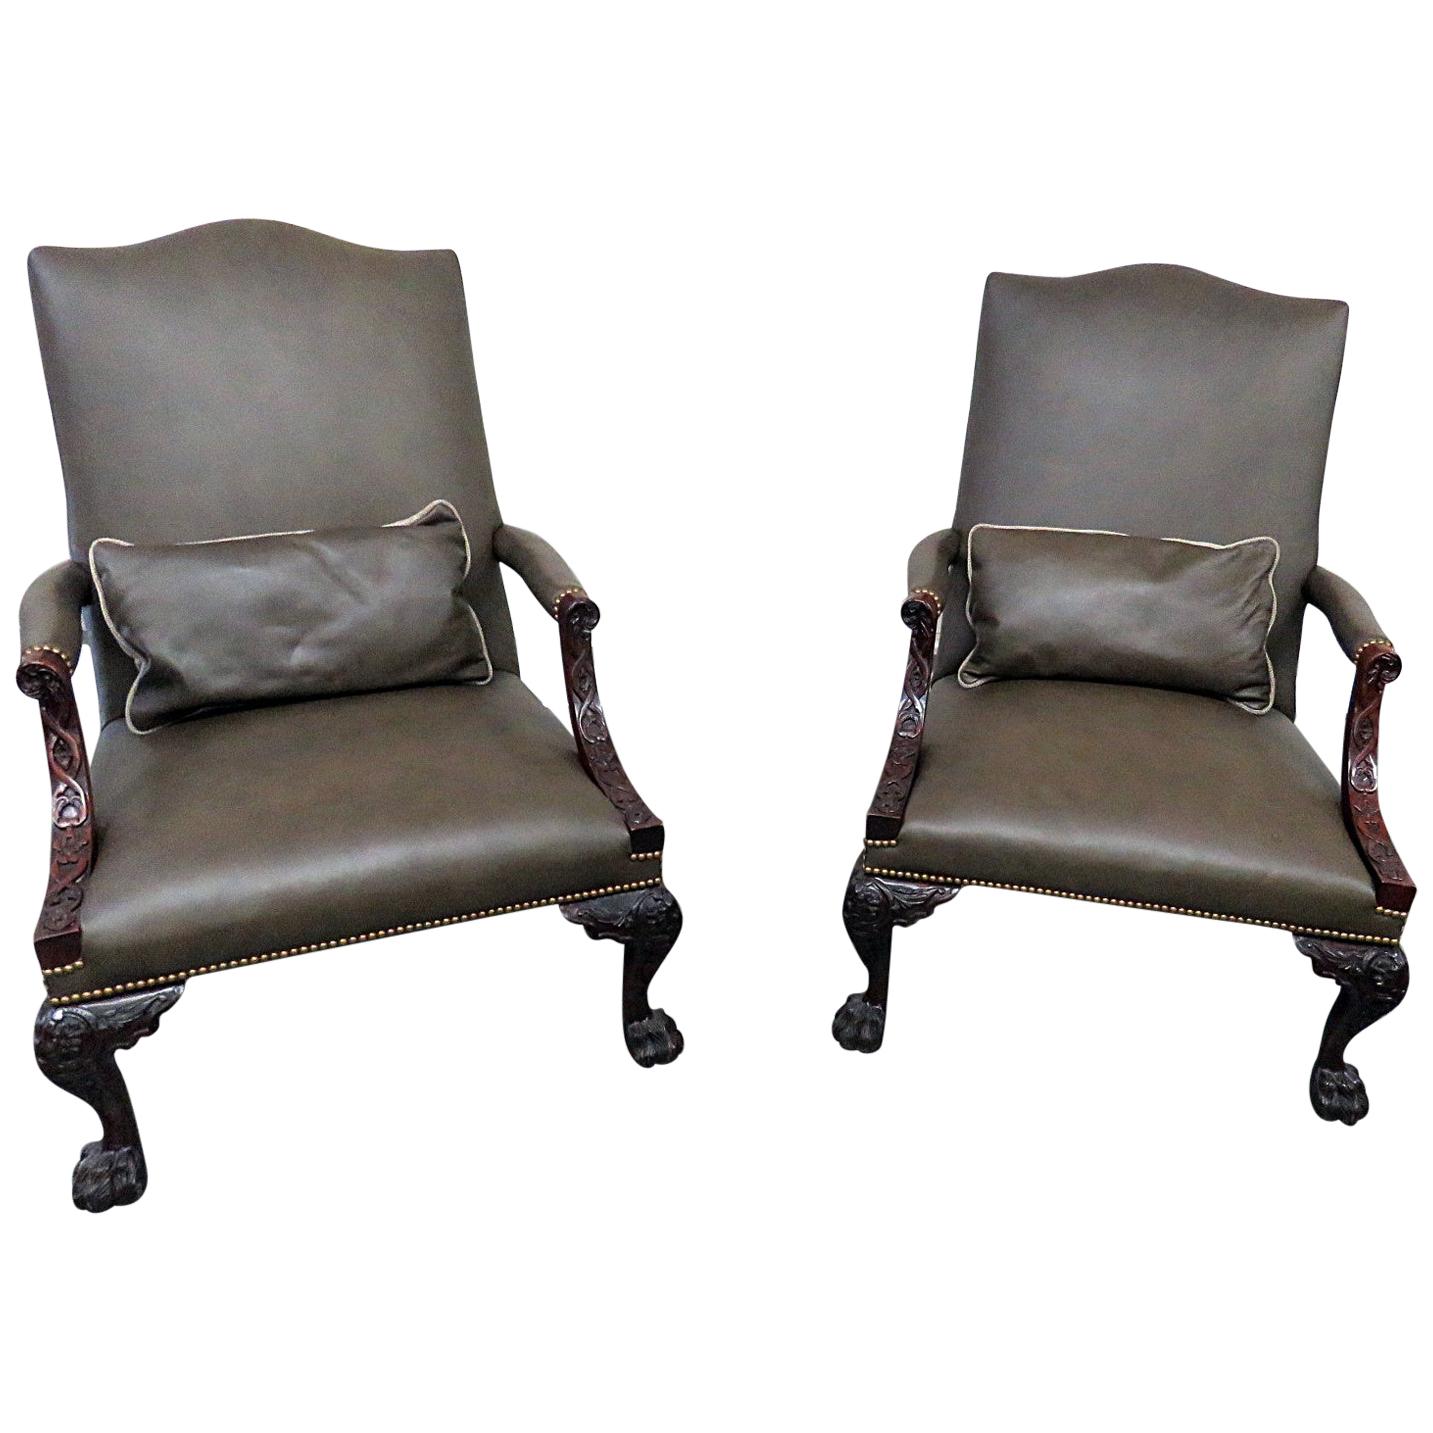 Pair of Large Leather Carved Mahogany Georgian Style Armchairs